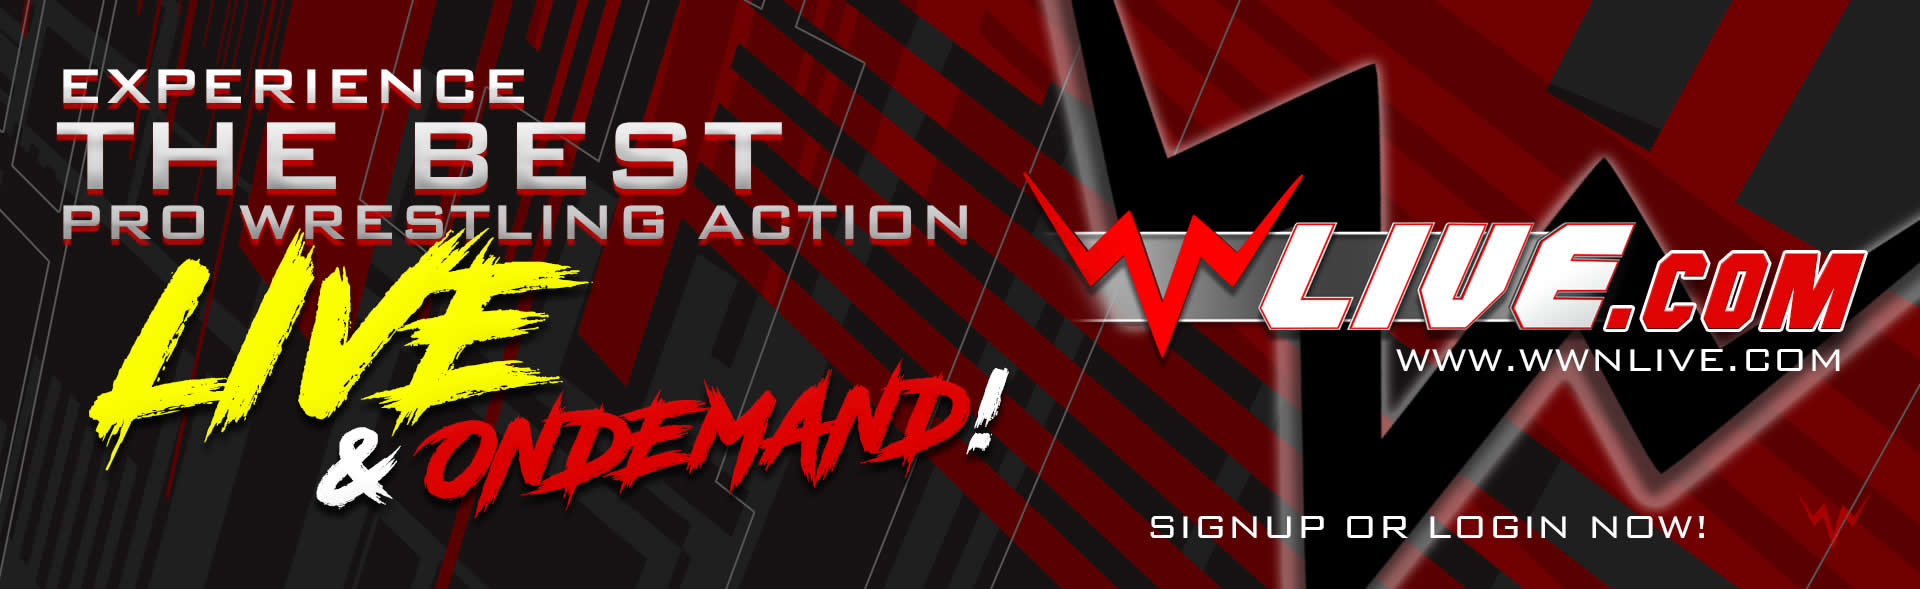 BANNER-1920X589-WWNLIVE_PROMO